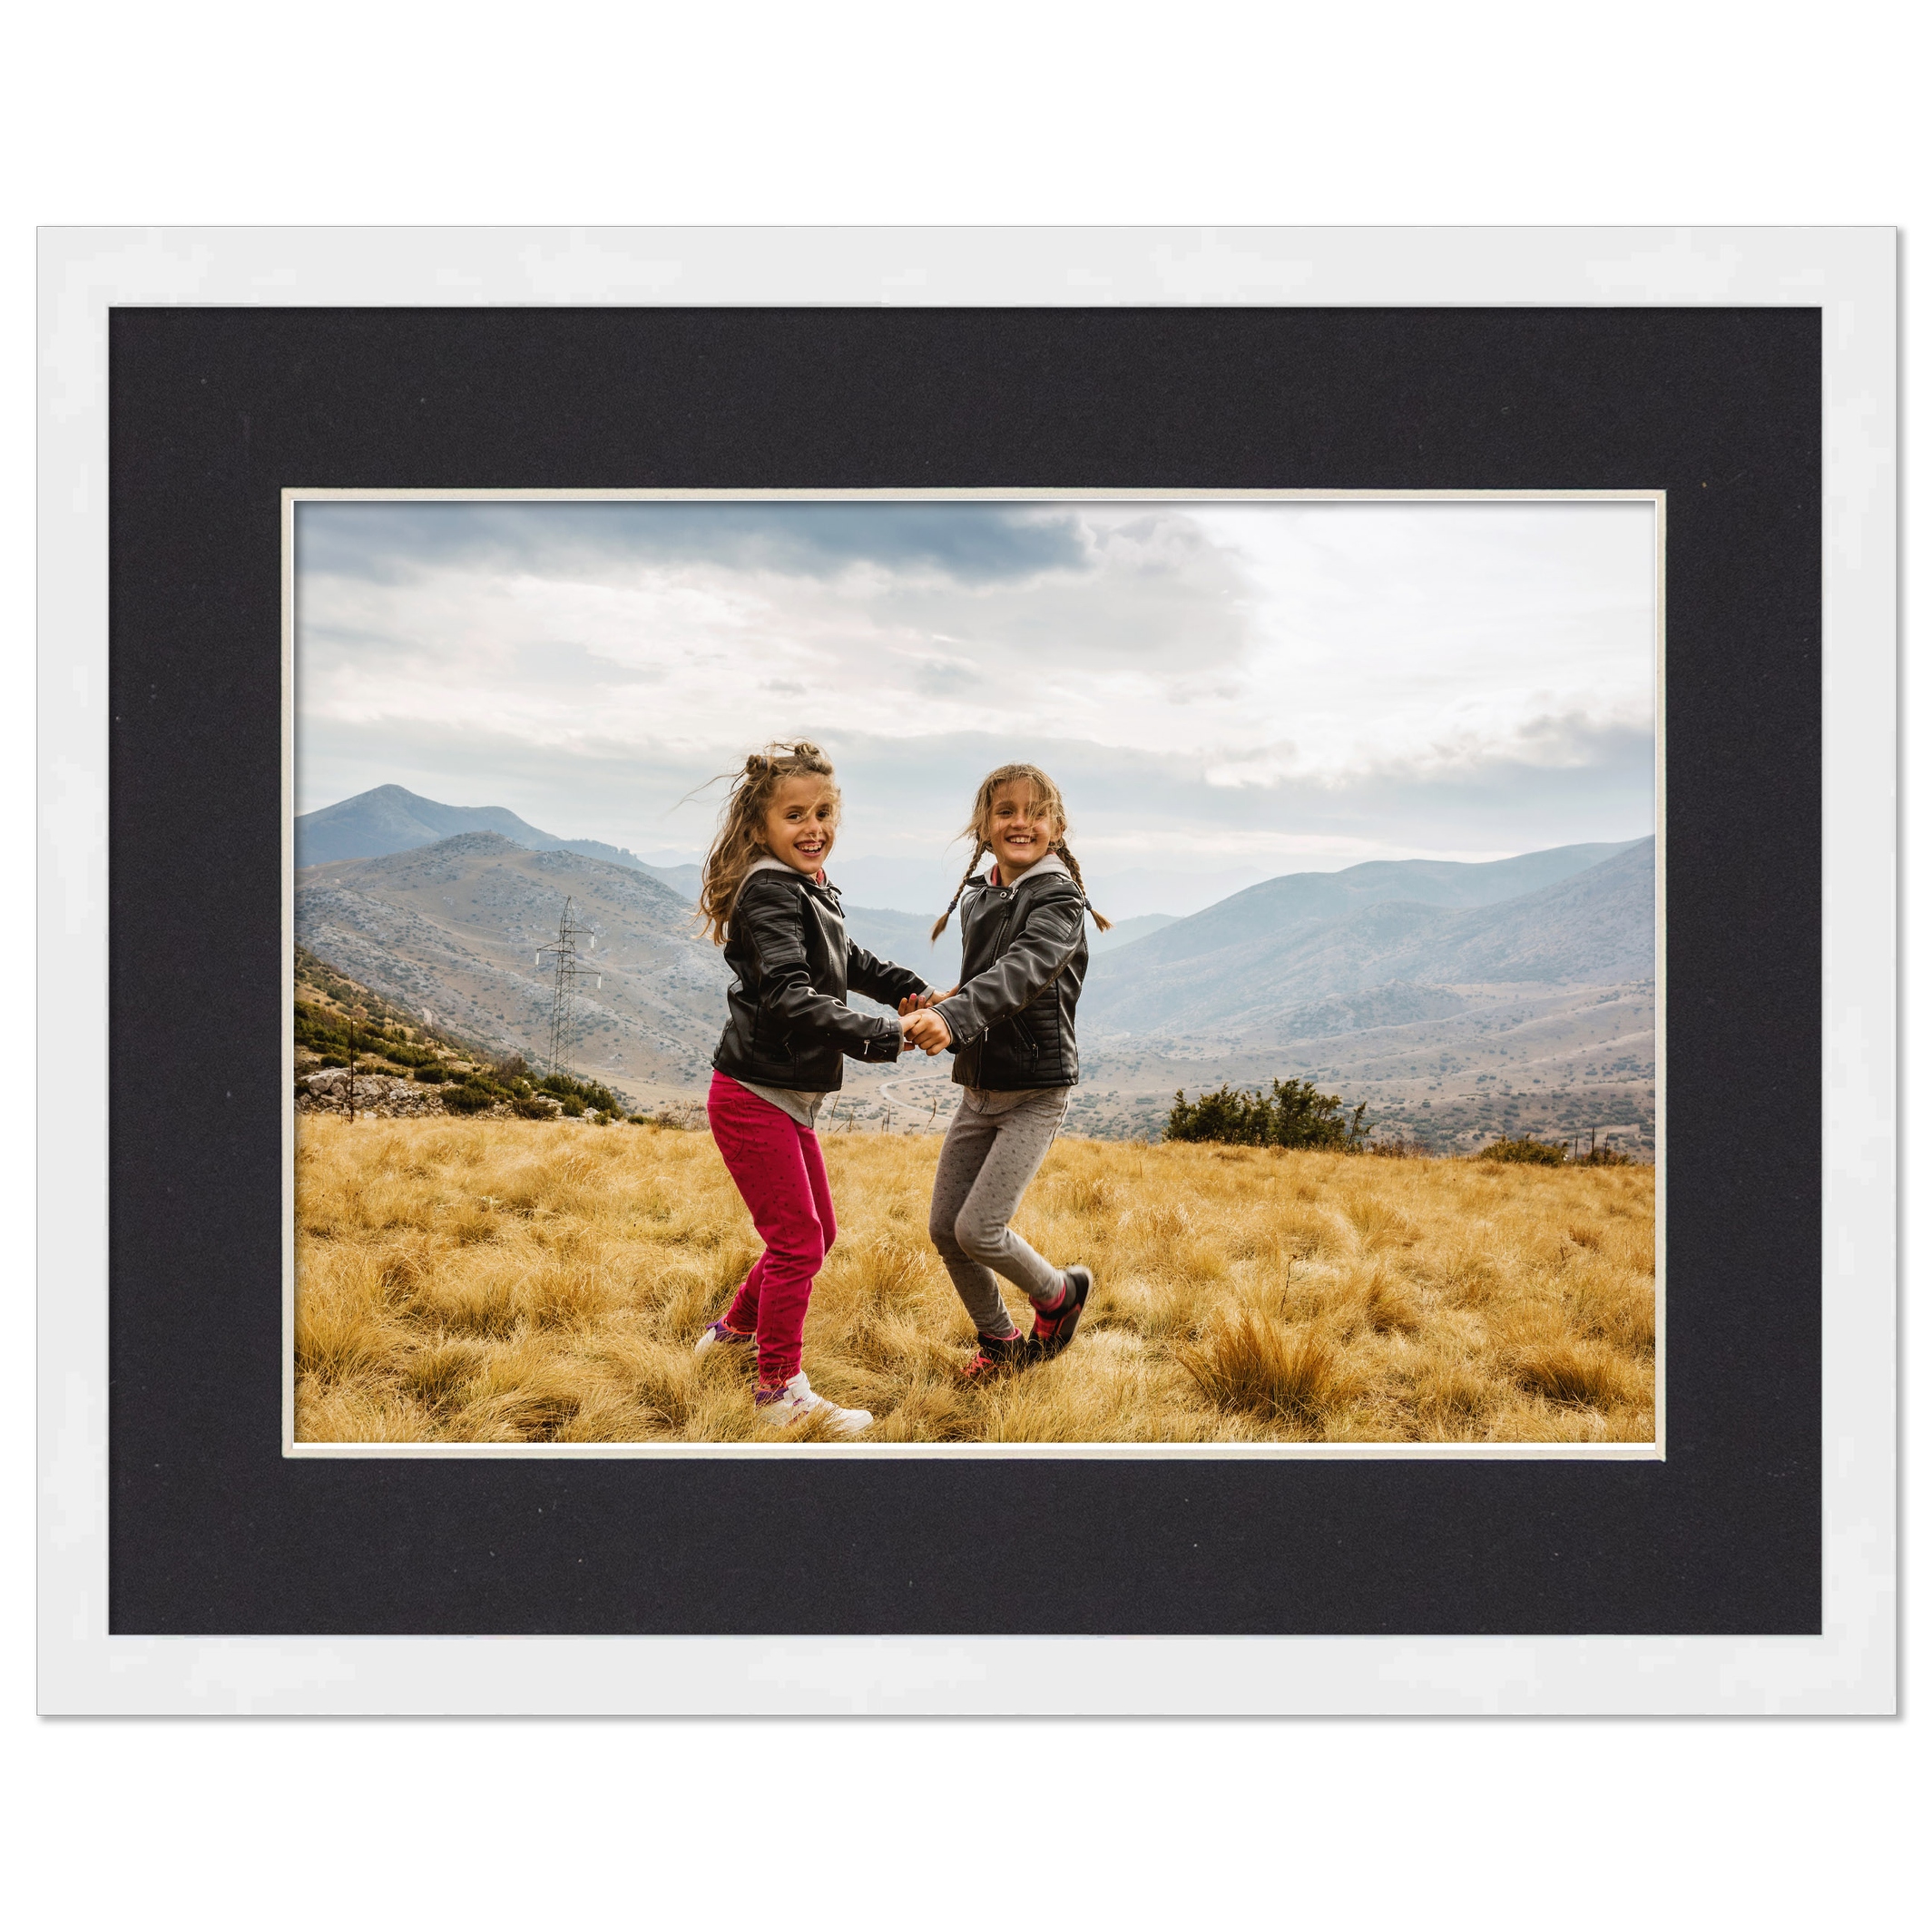 30x40 Frame with Mat - White 32x42 Frame Wood Made to Display Print or  Poster Measuring 30 x 40 Inches with Black Photo Mat - Bed Bath & Beyond -  38553541